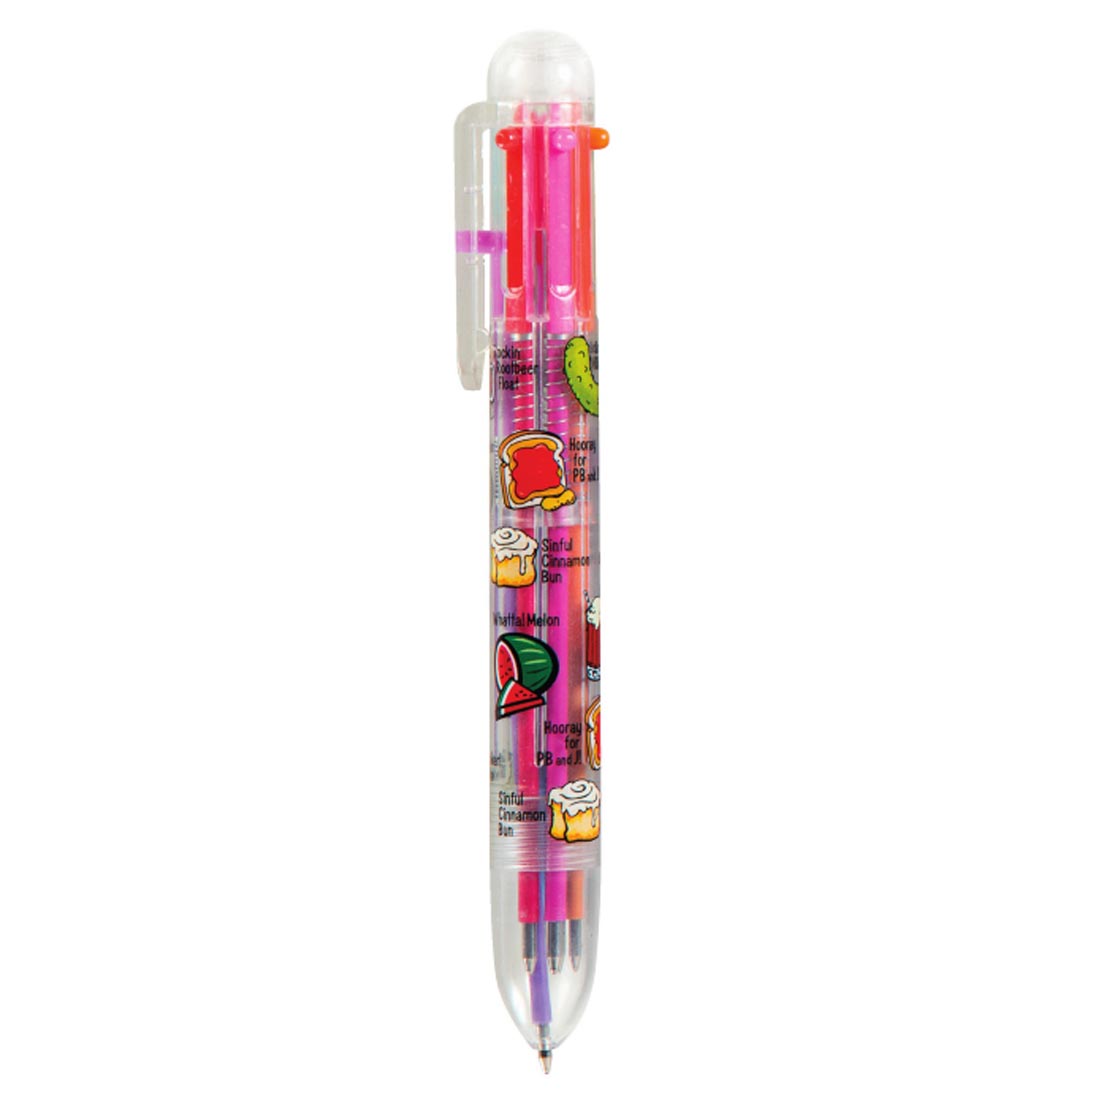 Scent-Sibles Scented 6-Color Pen